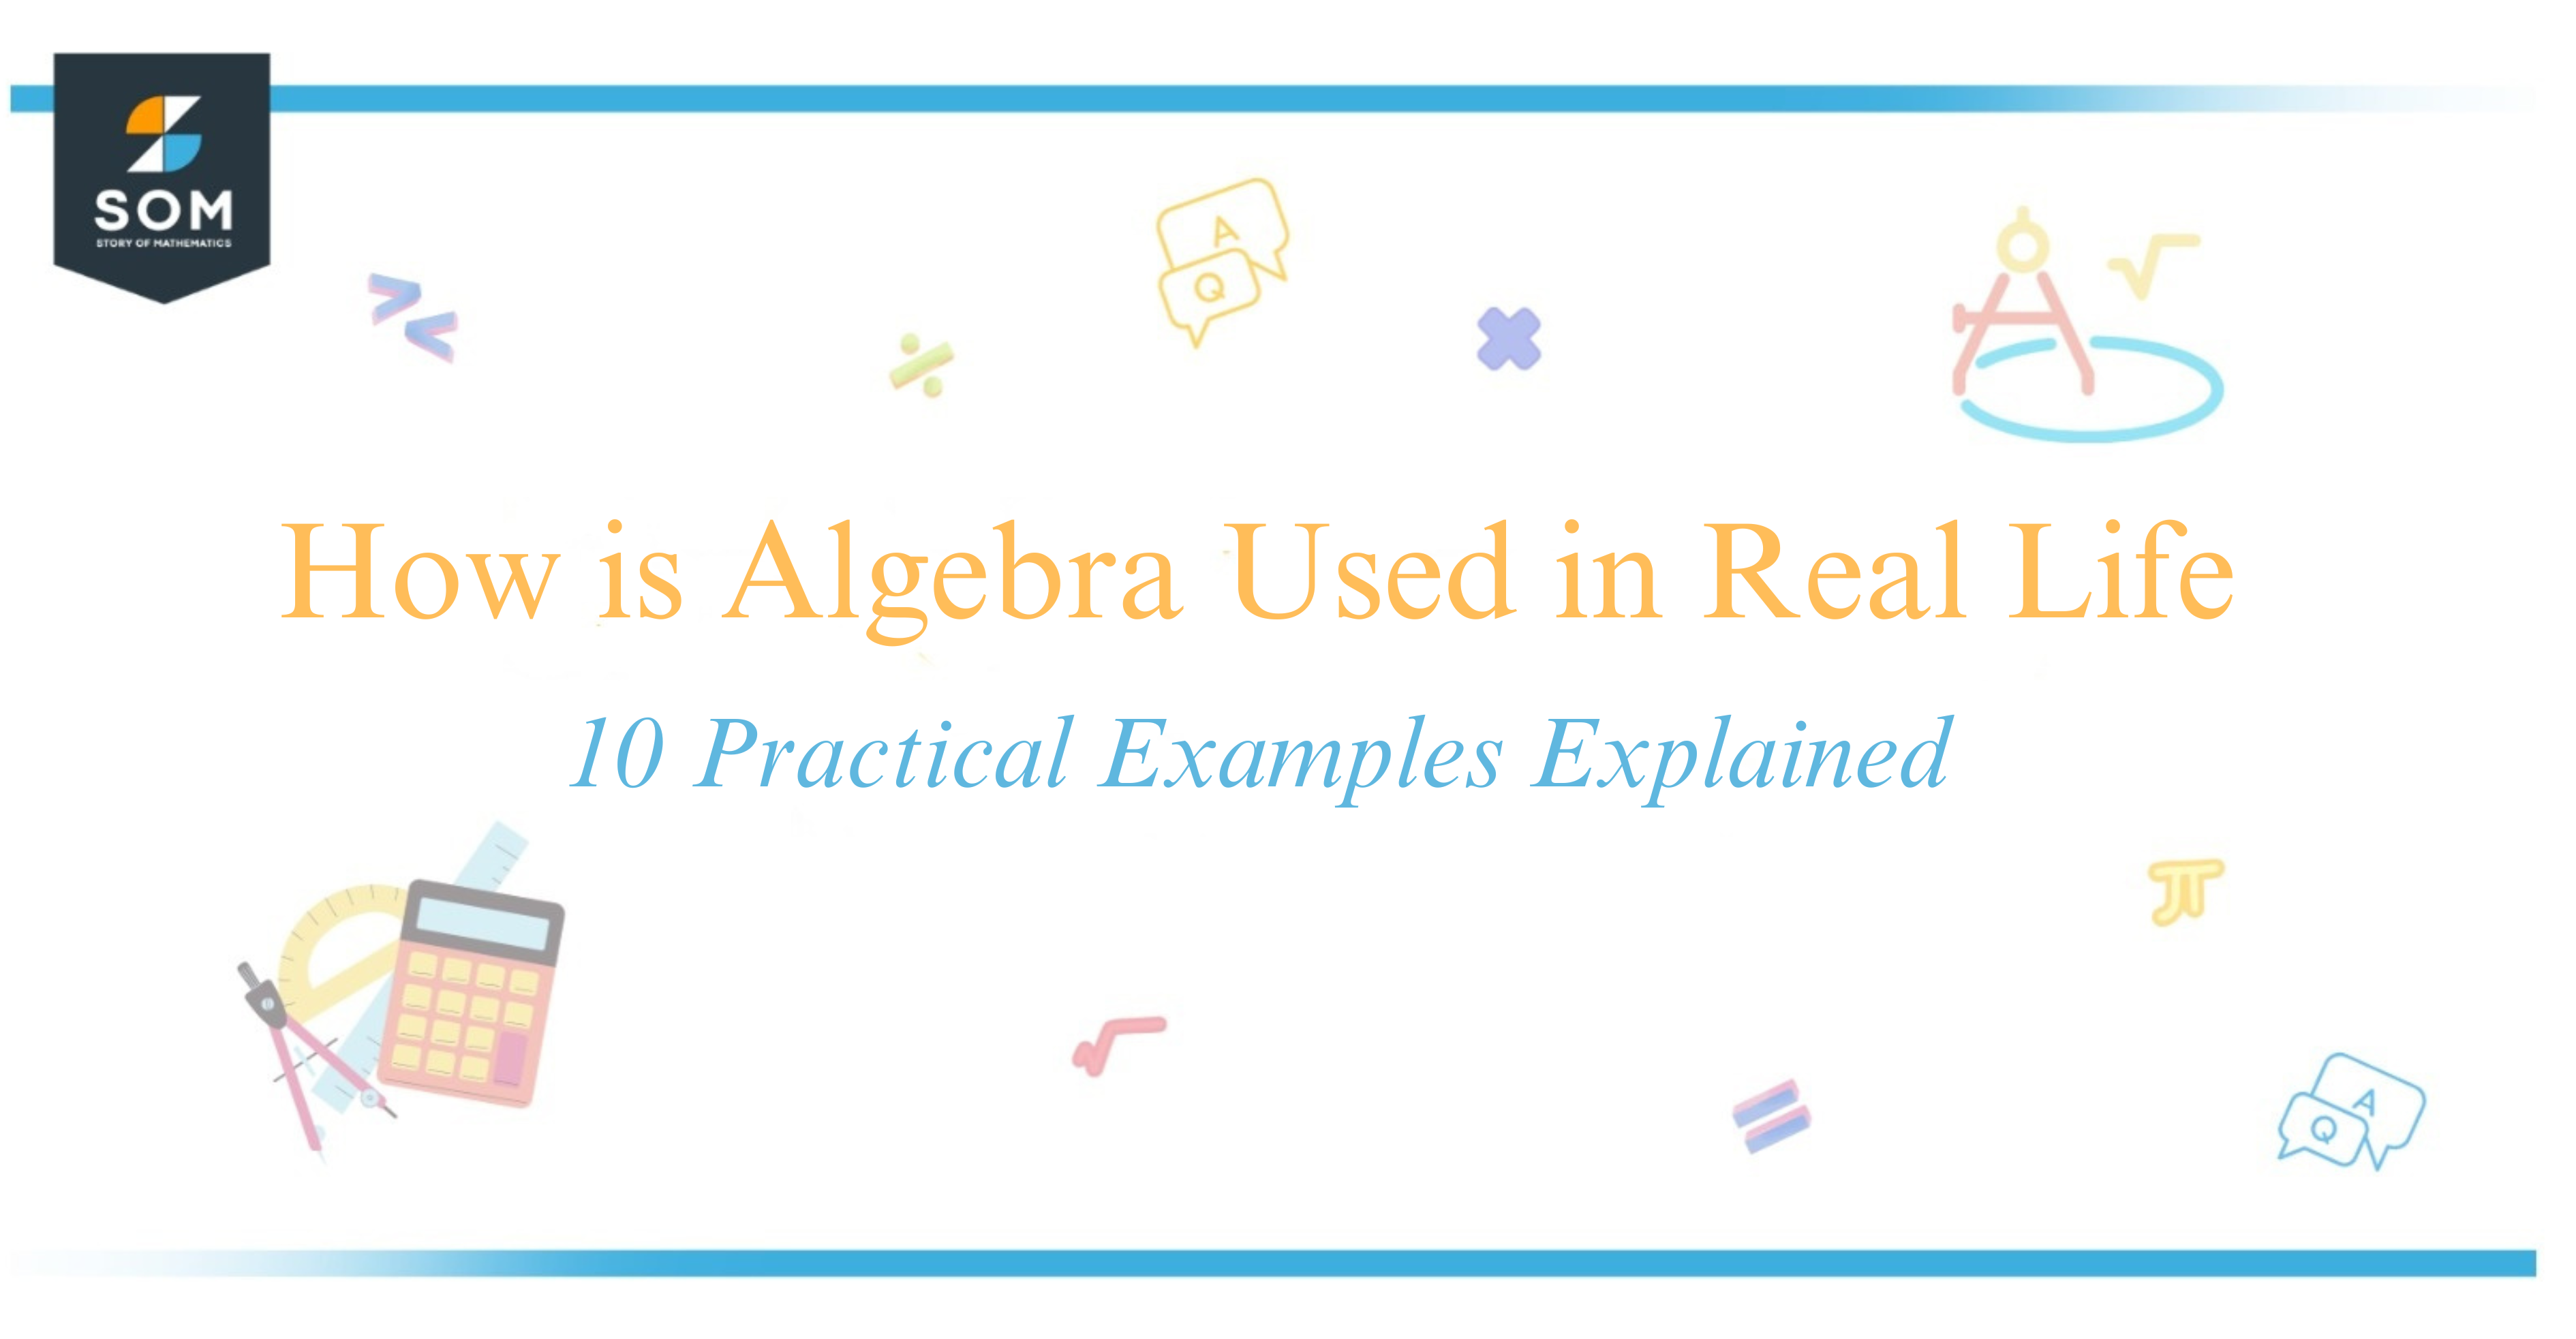 How is Algebra Used in Real Life 10 Practical Examples Explained